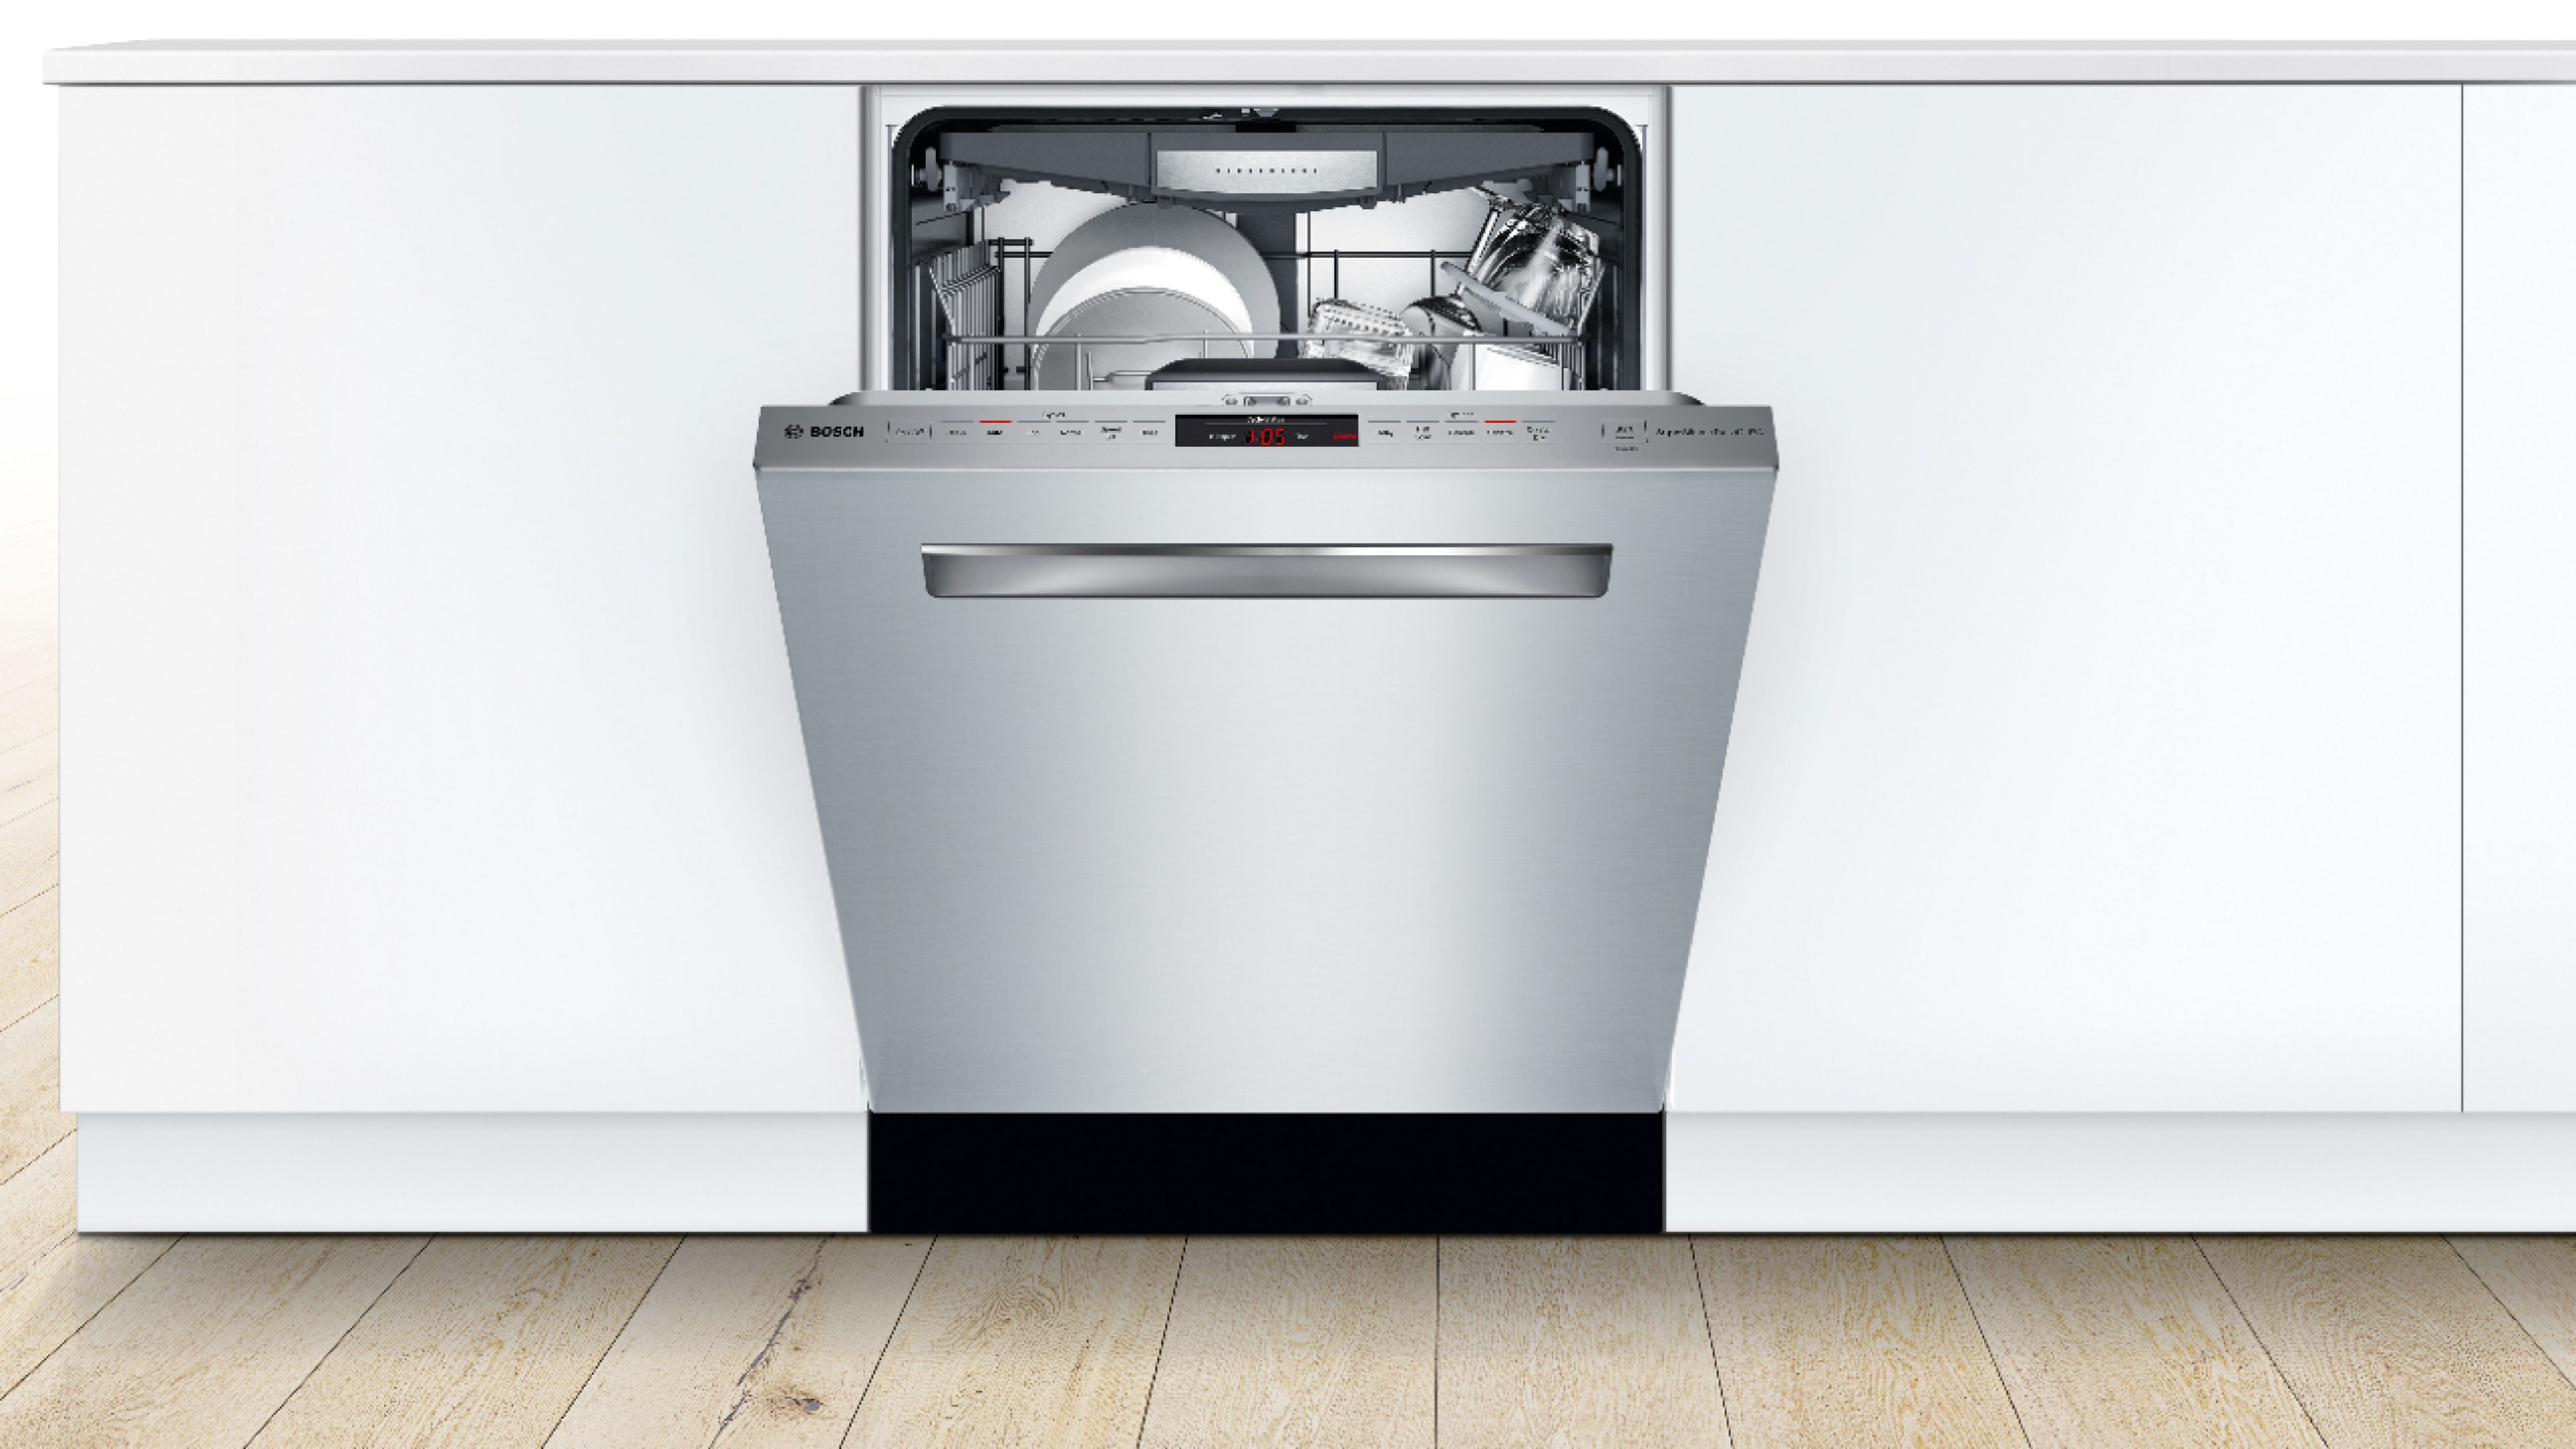 bosch-dishwasher-review-friedman-s-ideas-and-innovations